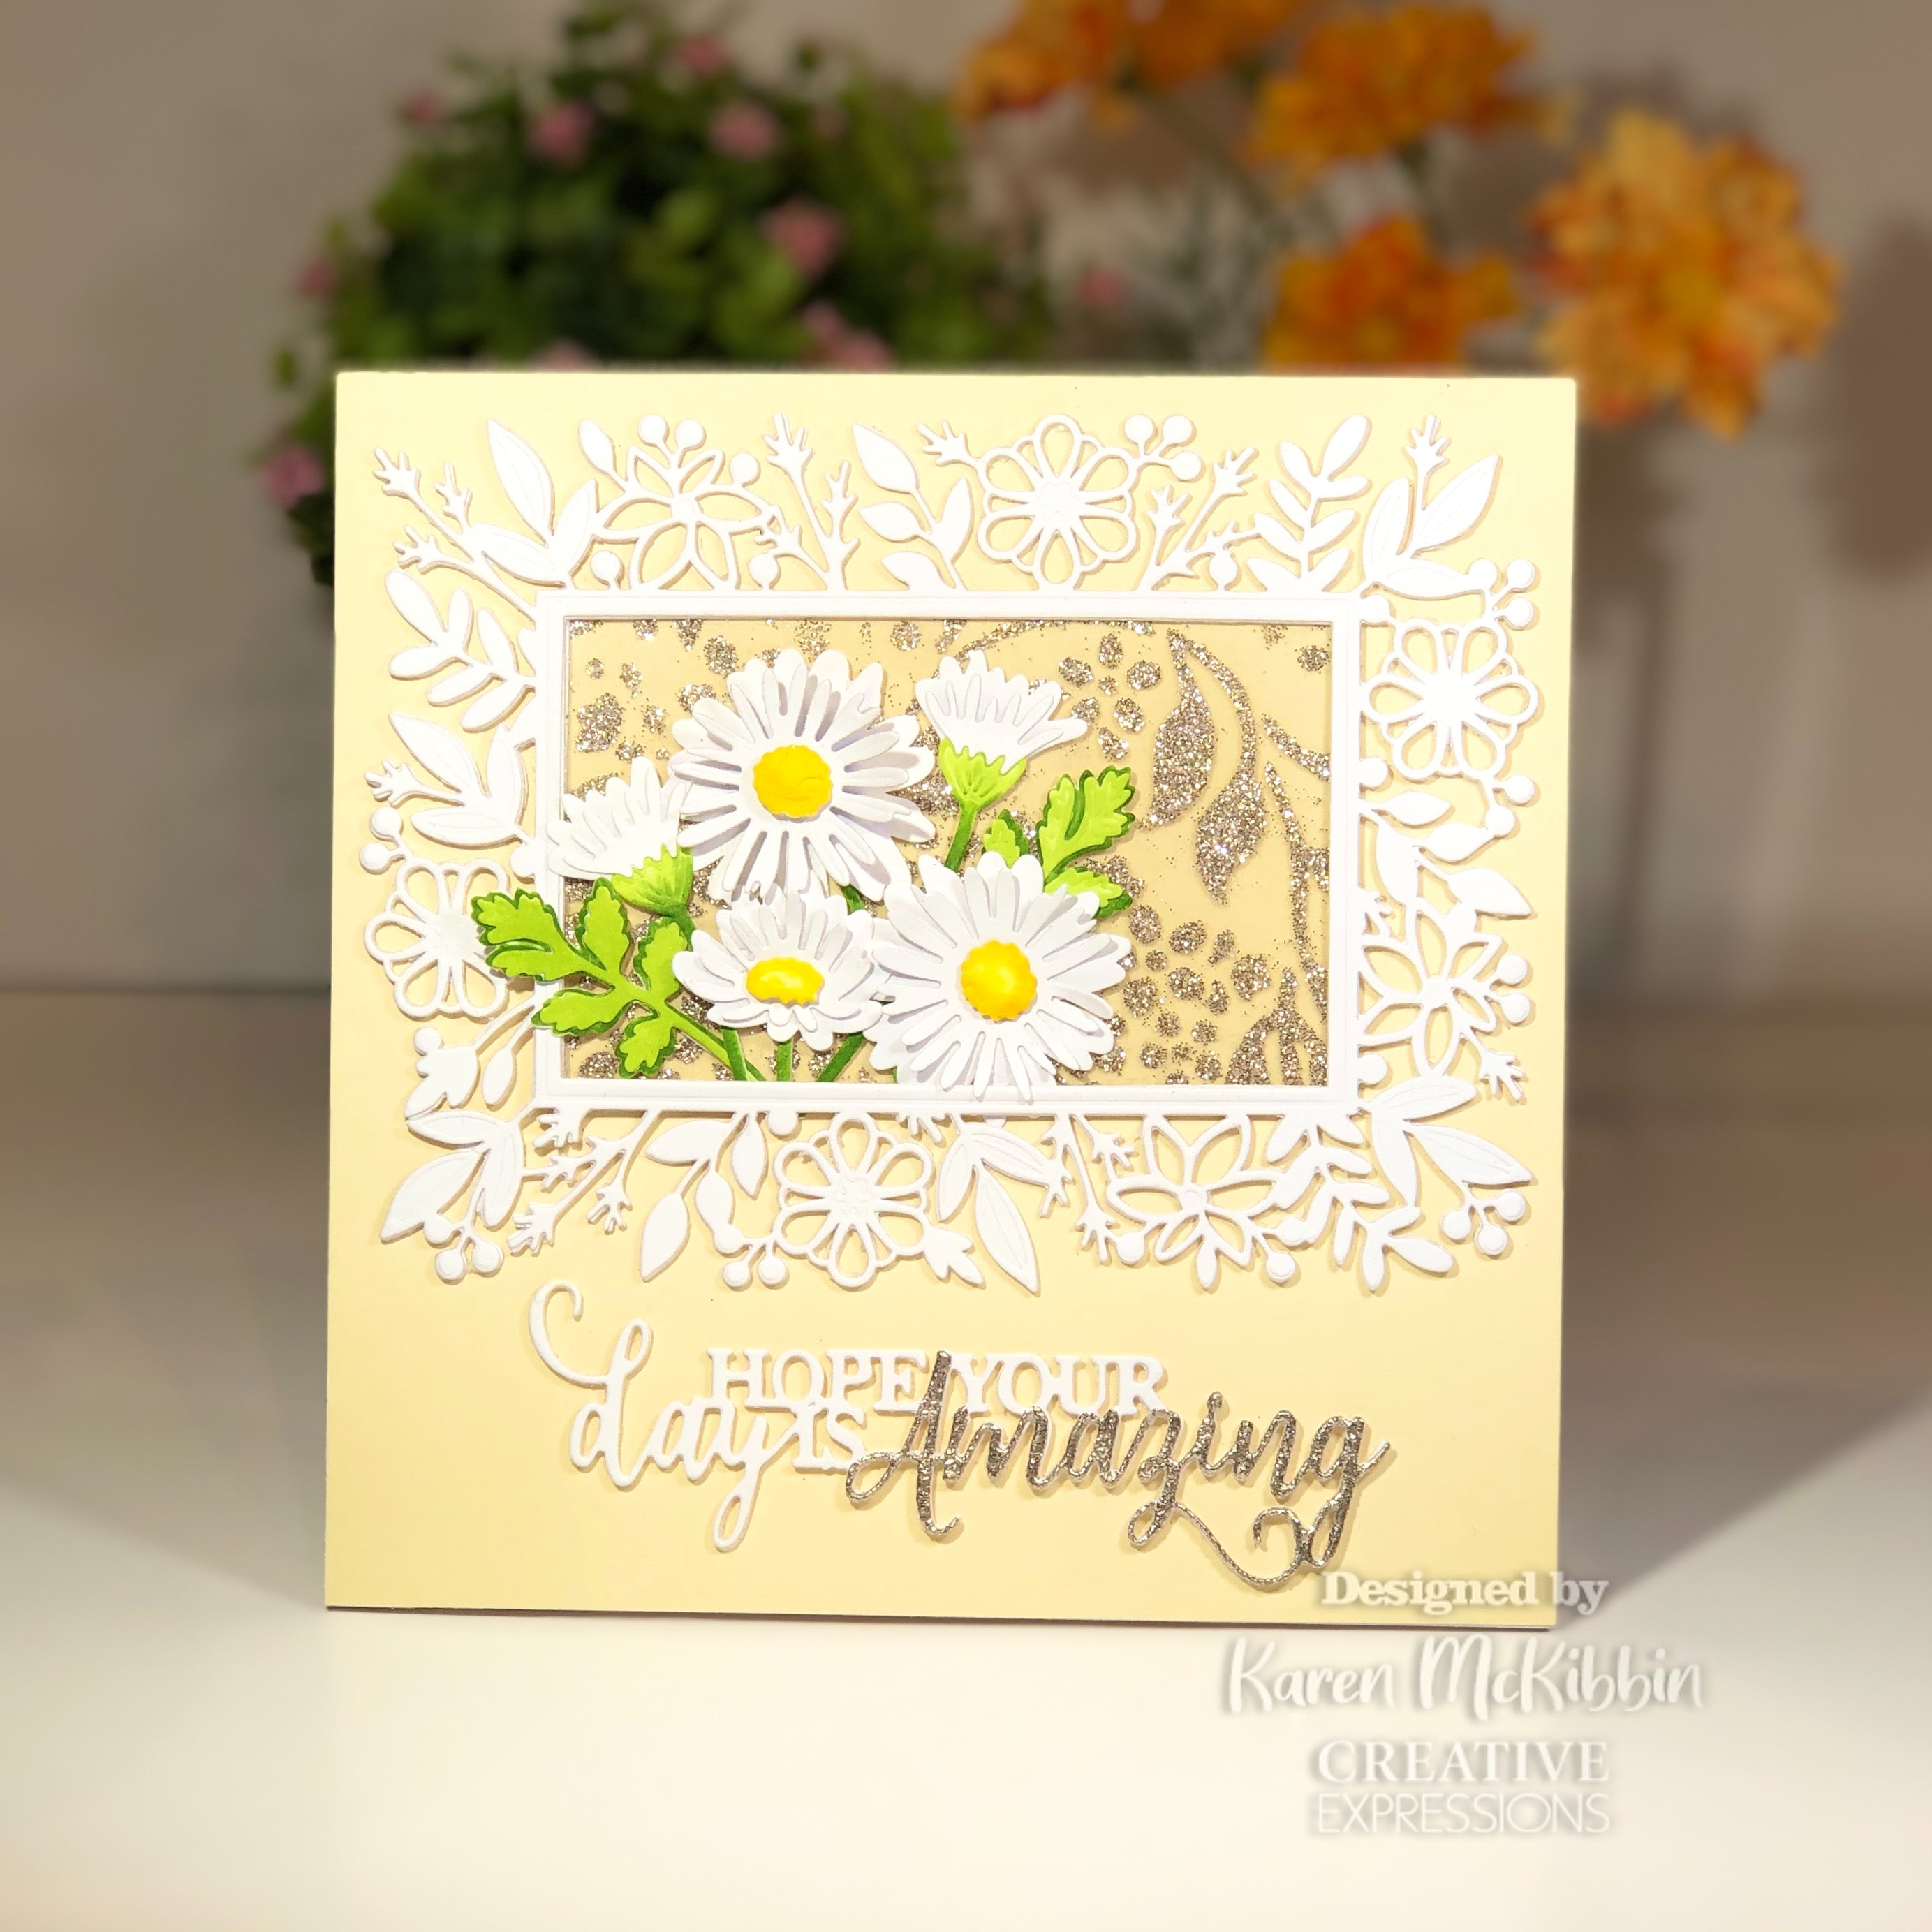 Creative Expressions Sue Wilson Layered Flowers Collection Daisy Craft Die